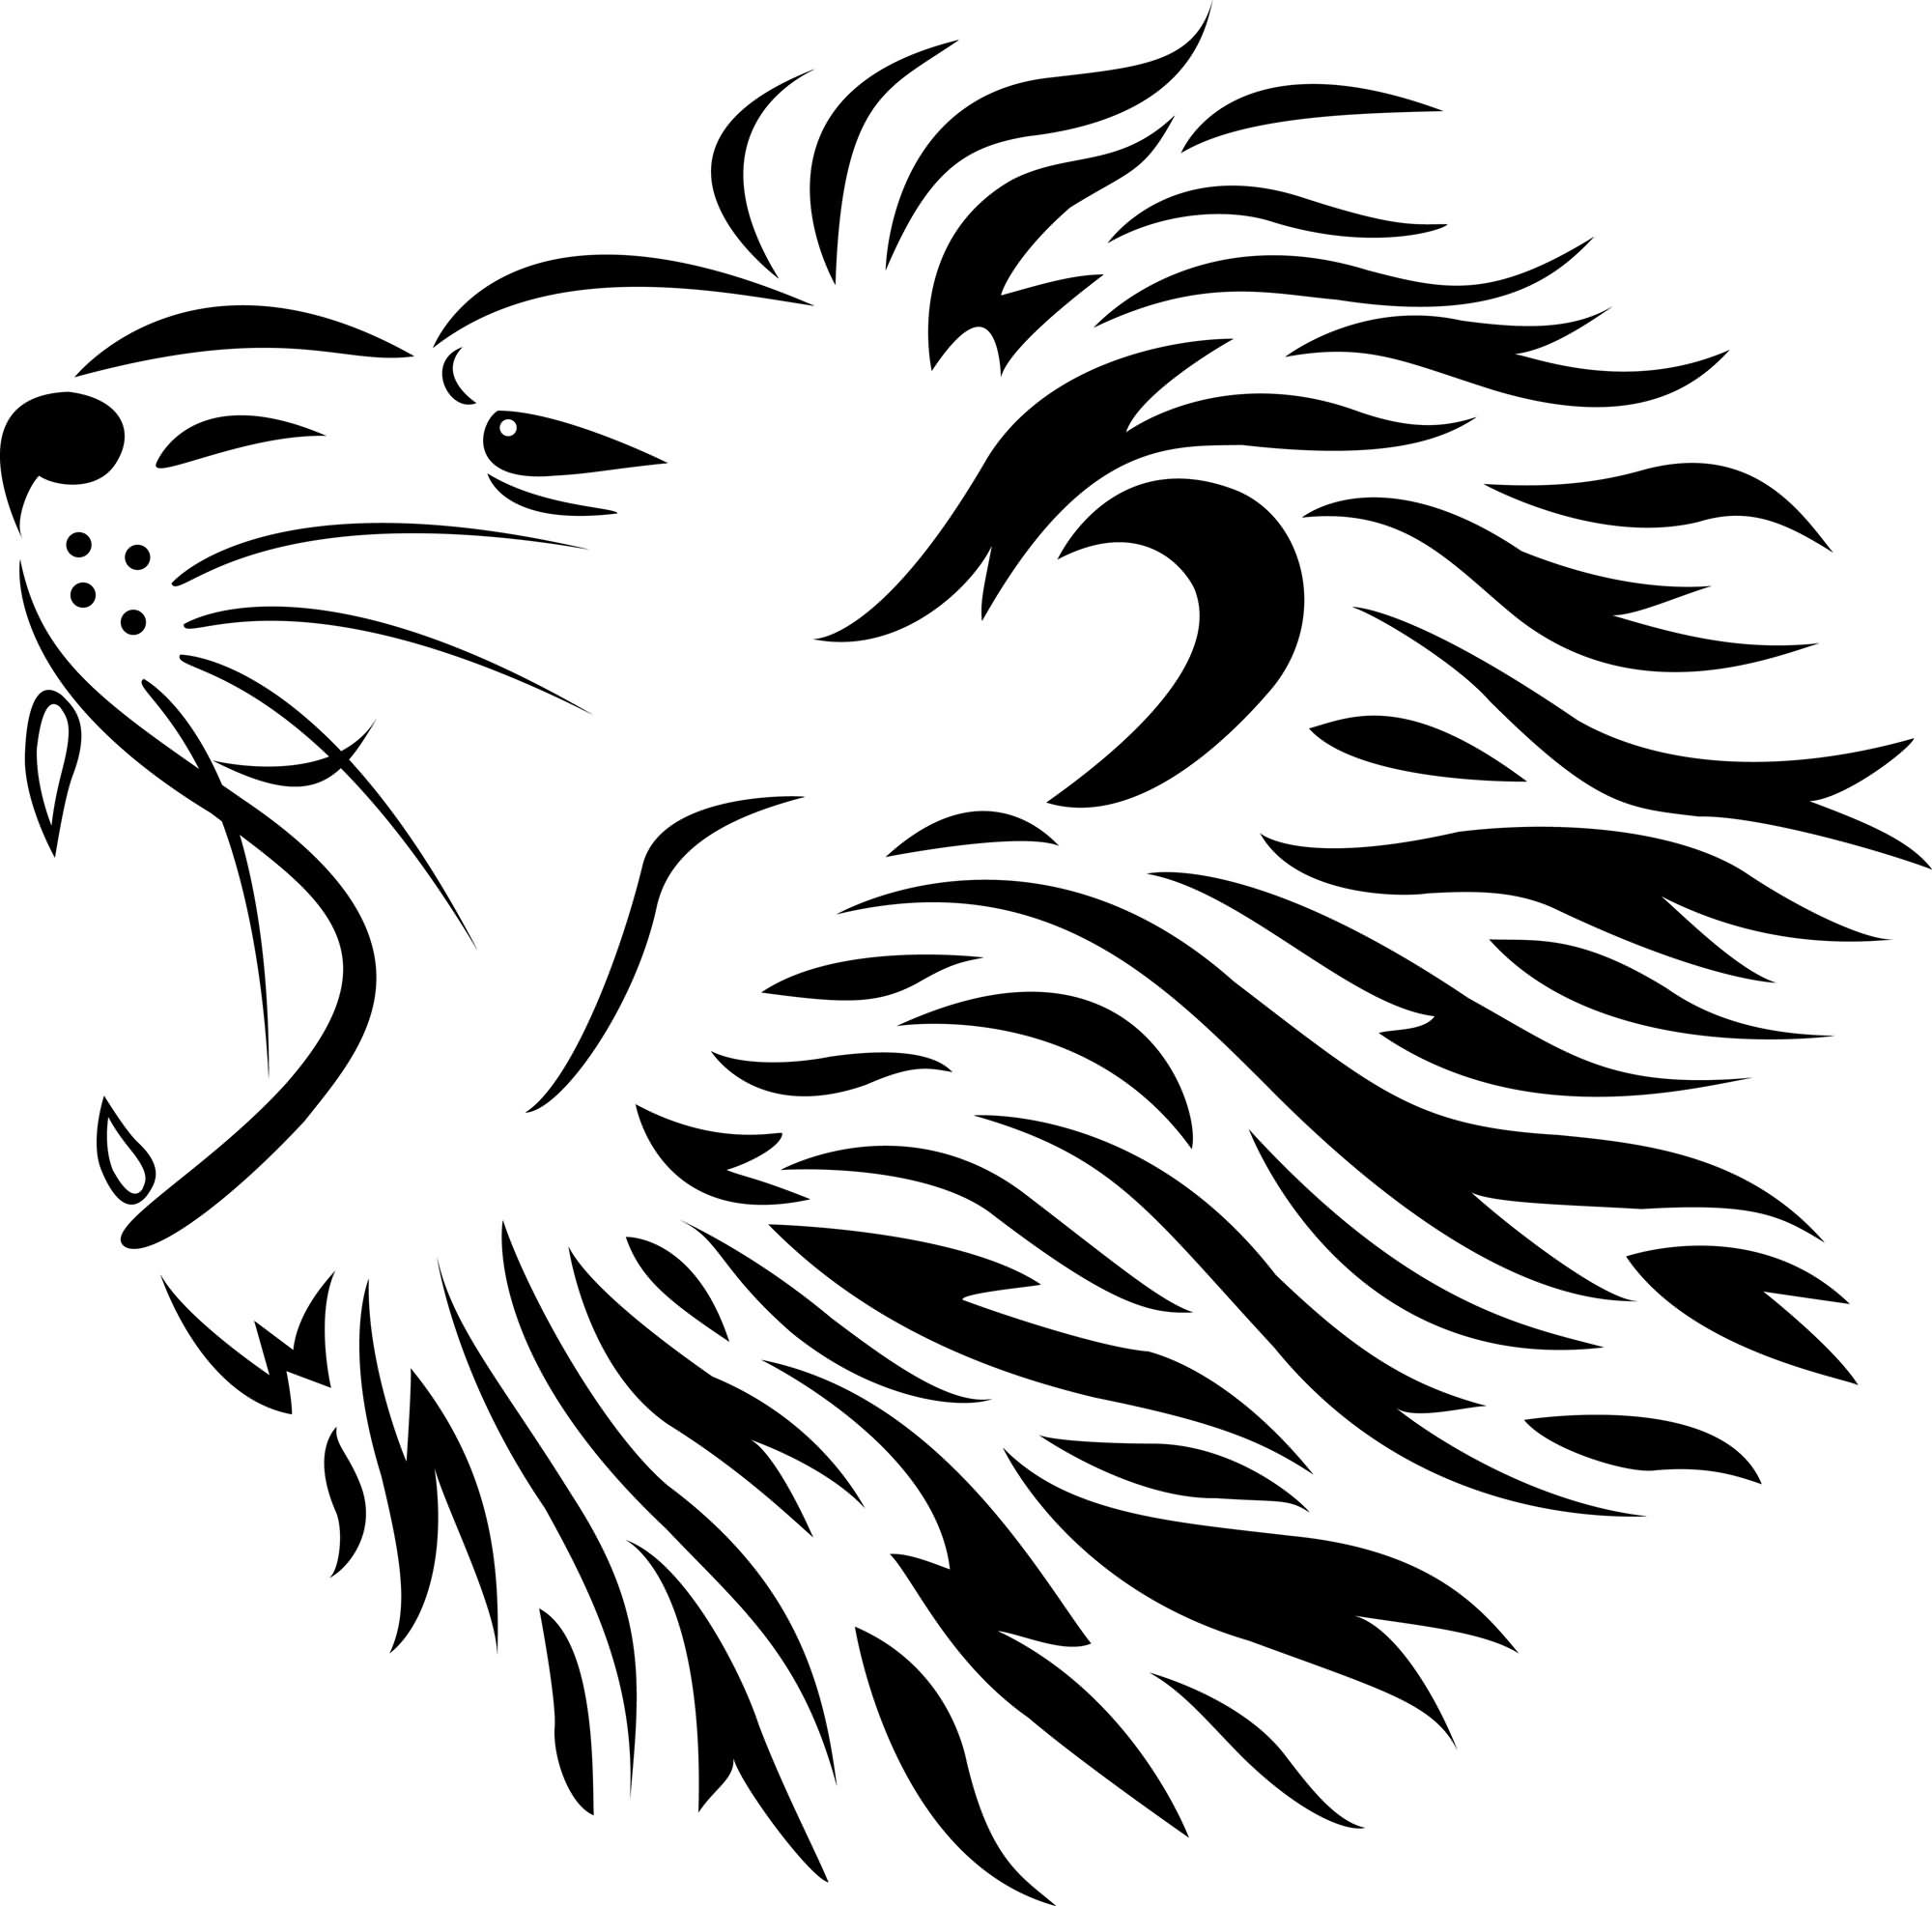 . Hdpng.com Lion Tattoo Black And White 6 Tribal Roaring Lion Head Tattoo Design 2.jpg Hdpng.com  - Lion Head Roaring, Transparent background PNG HD thumbnail